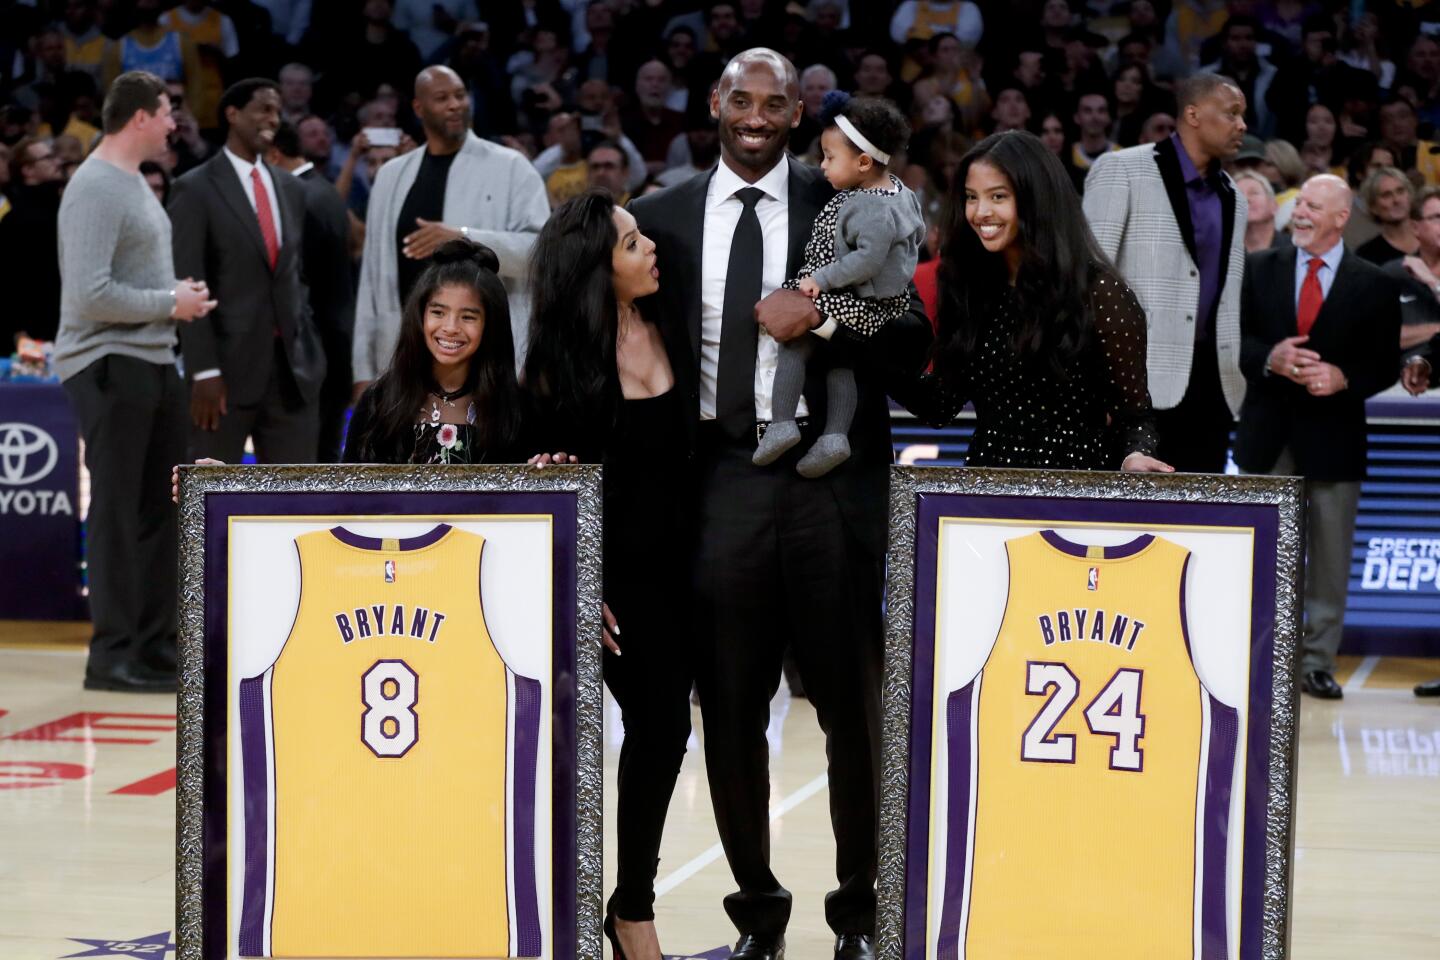 Gianna, Vanessa, Kobe (holding baby Capri) and Natalia Bryant on the court with his two framed retired jerseys.